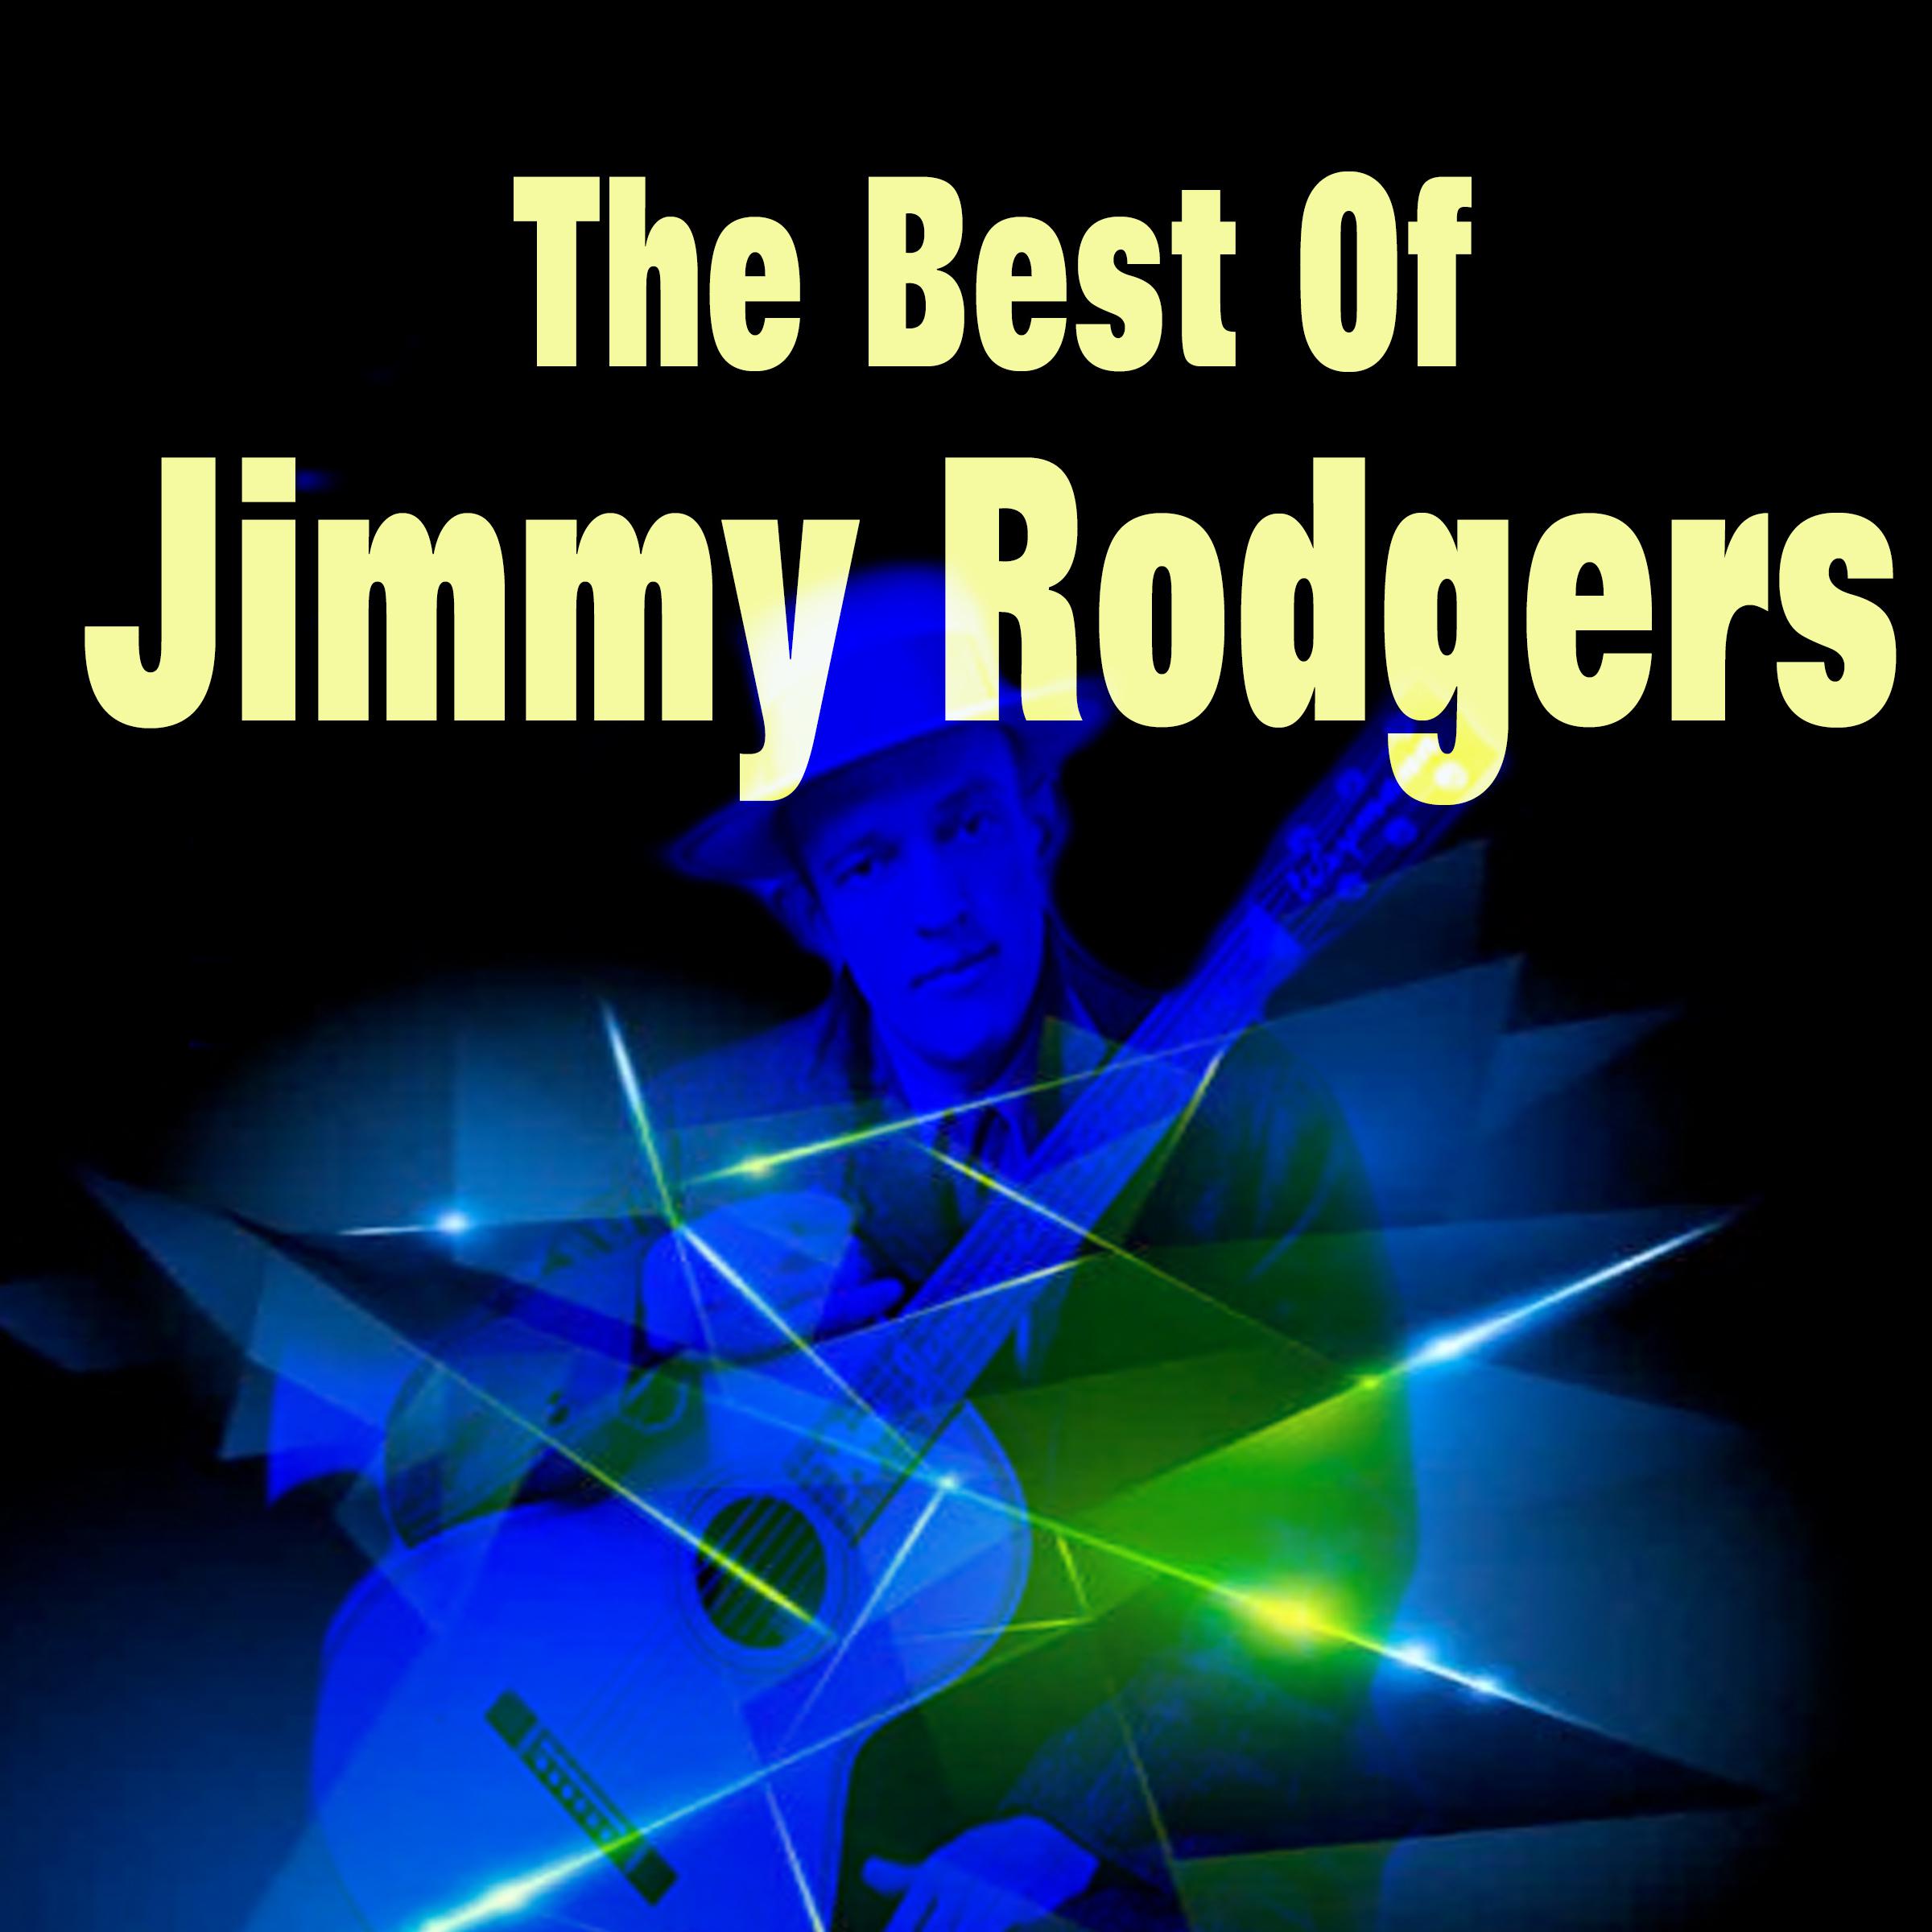 The Best of Jimmy Rodgers